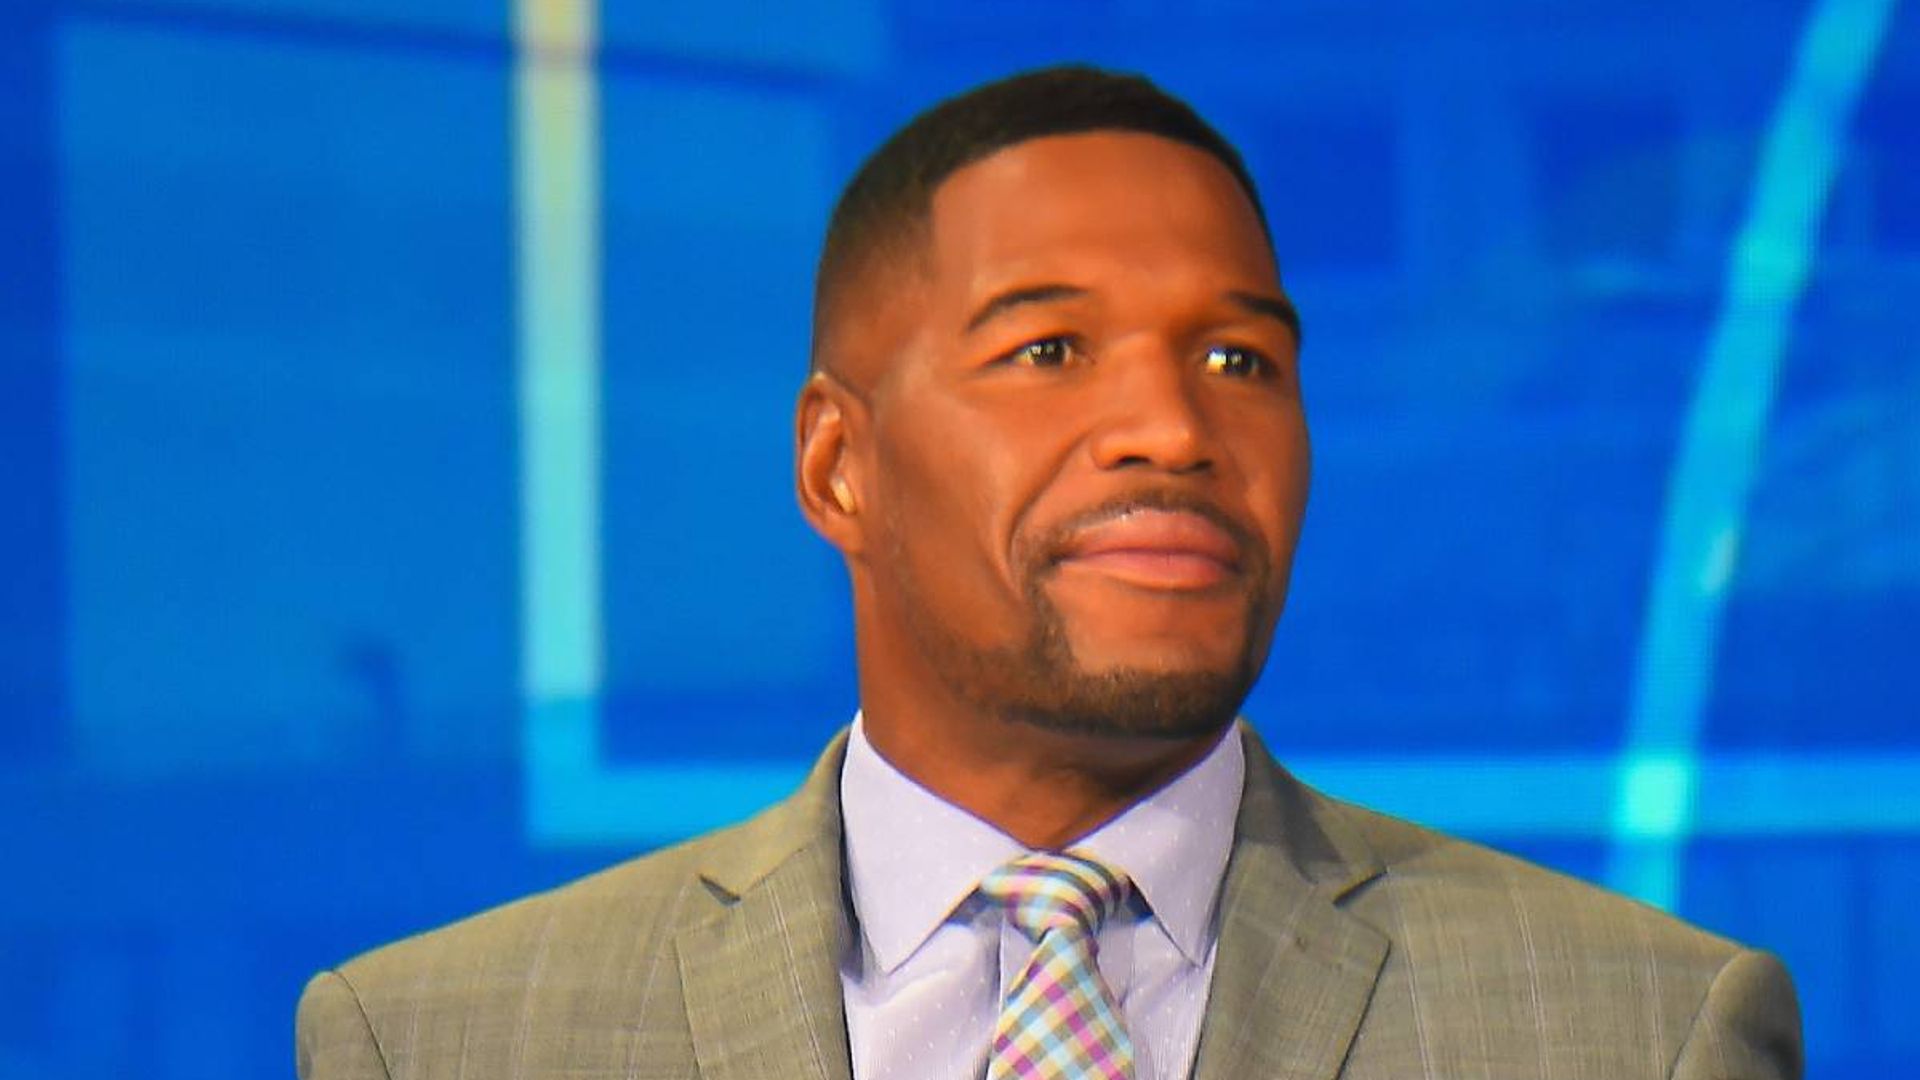 GMA's Michael Strahan opens up about unexpected rejection in heartfelt ...